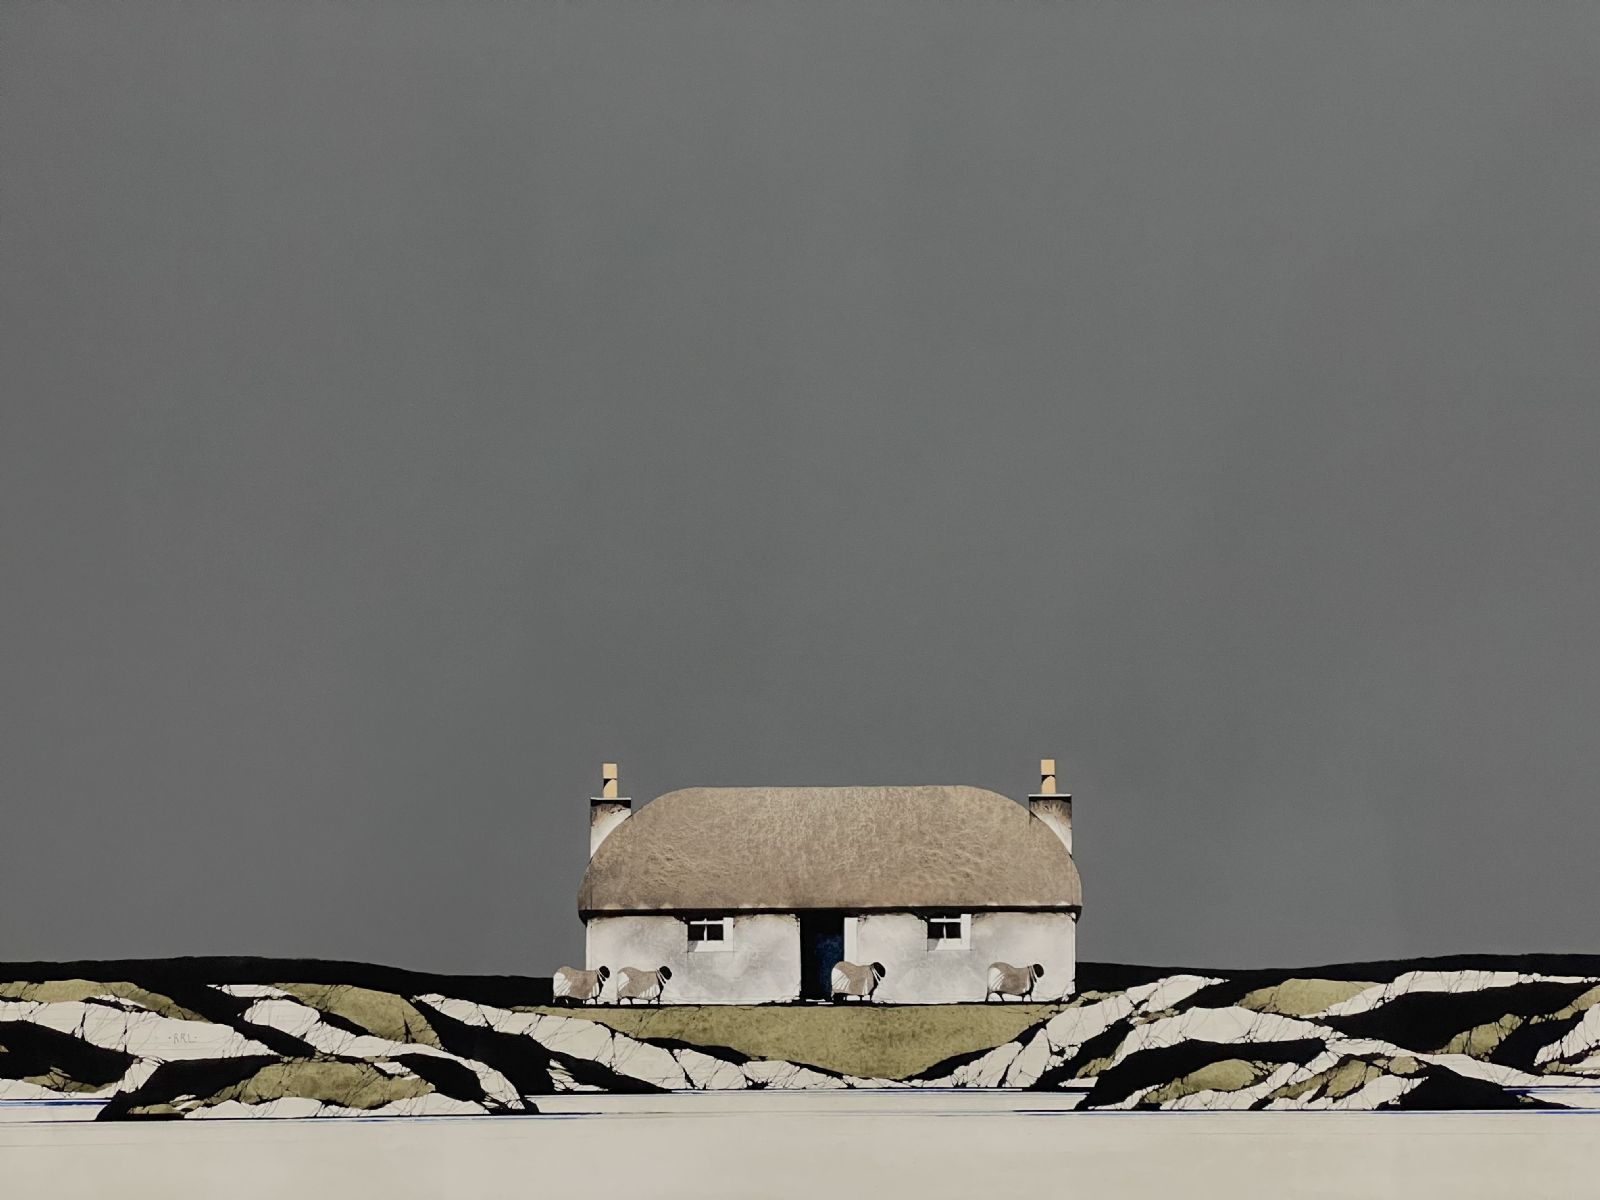 South Uist Thatched Cottage by Ron Lawson